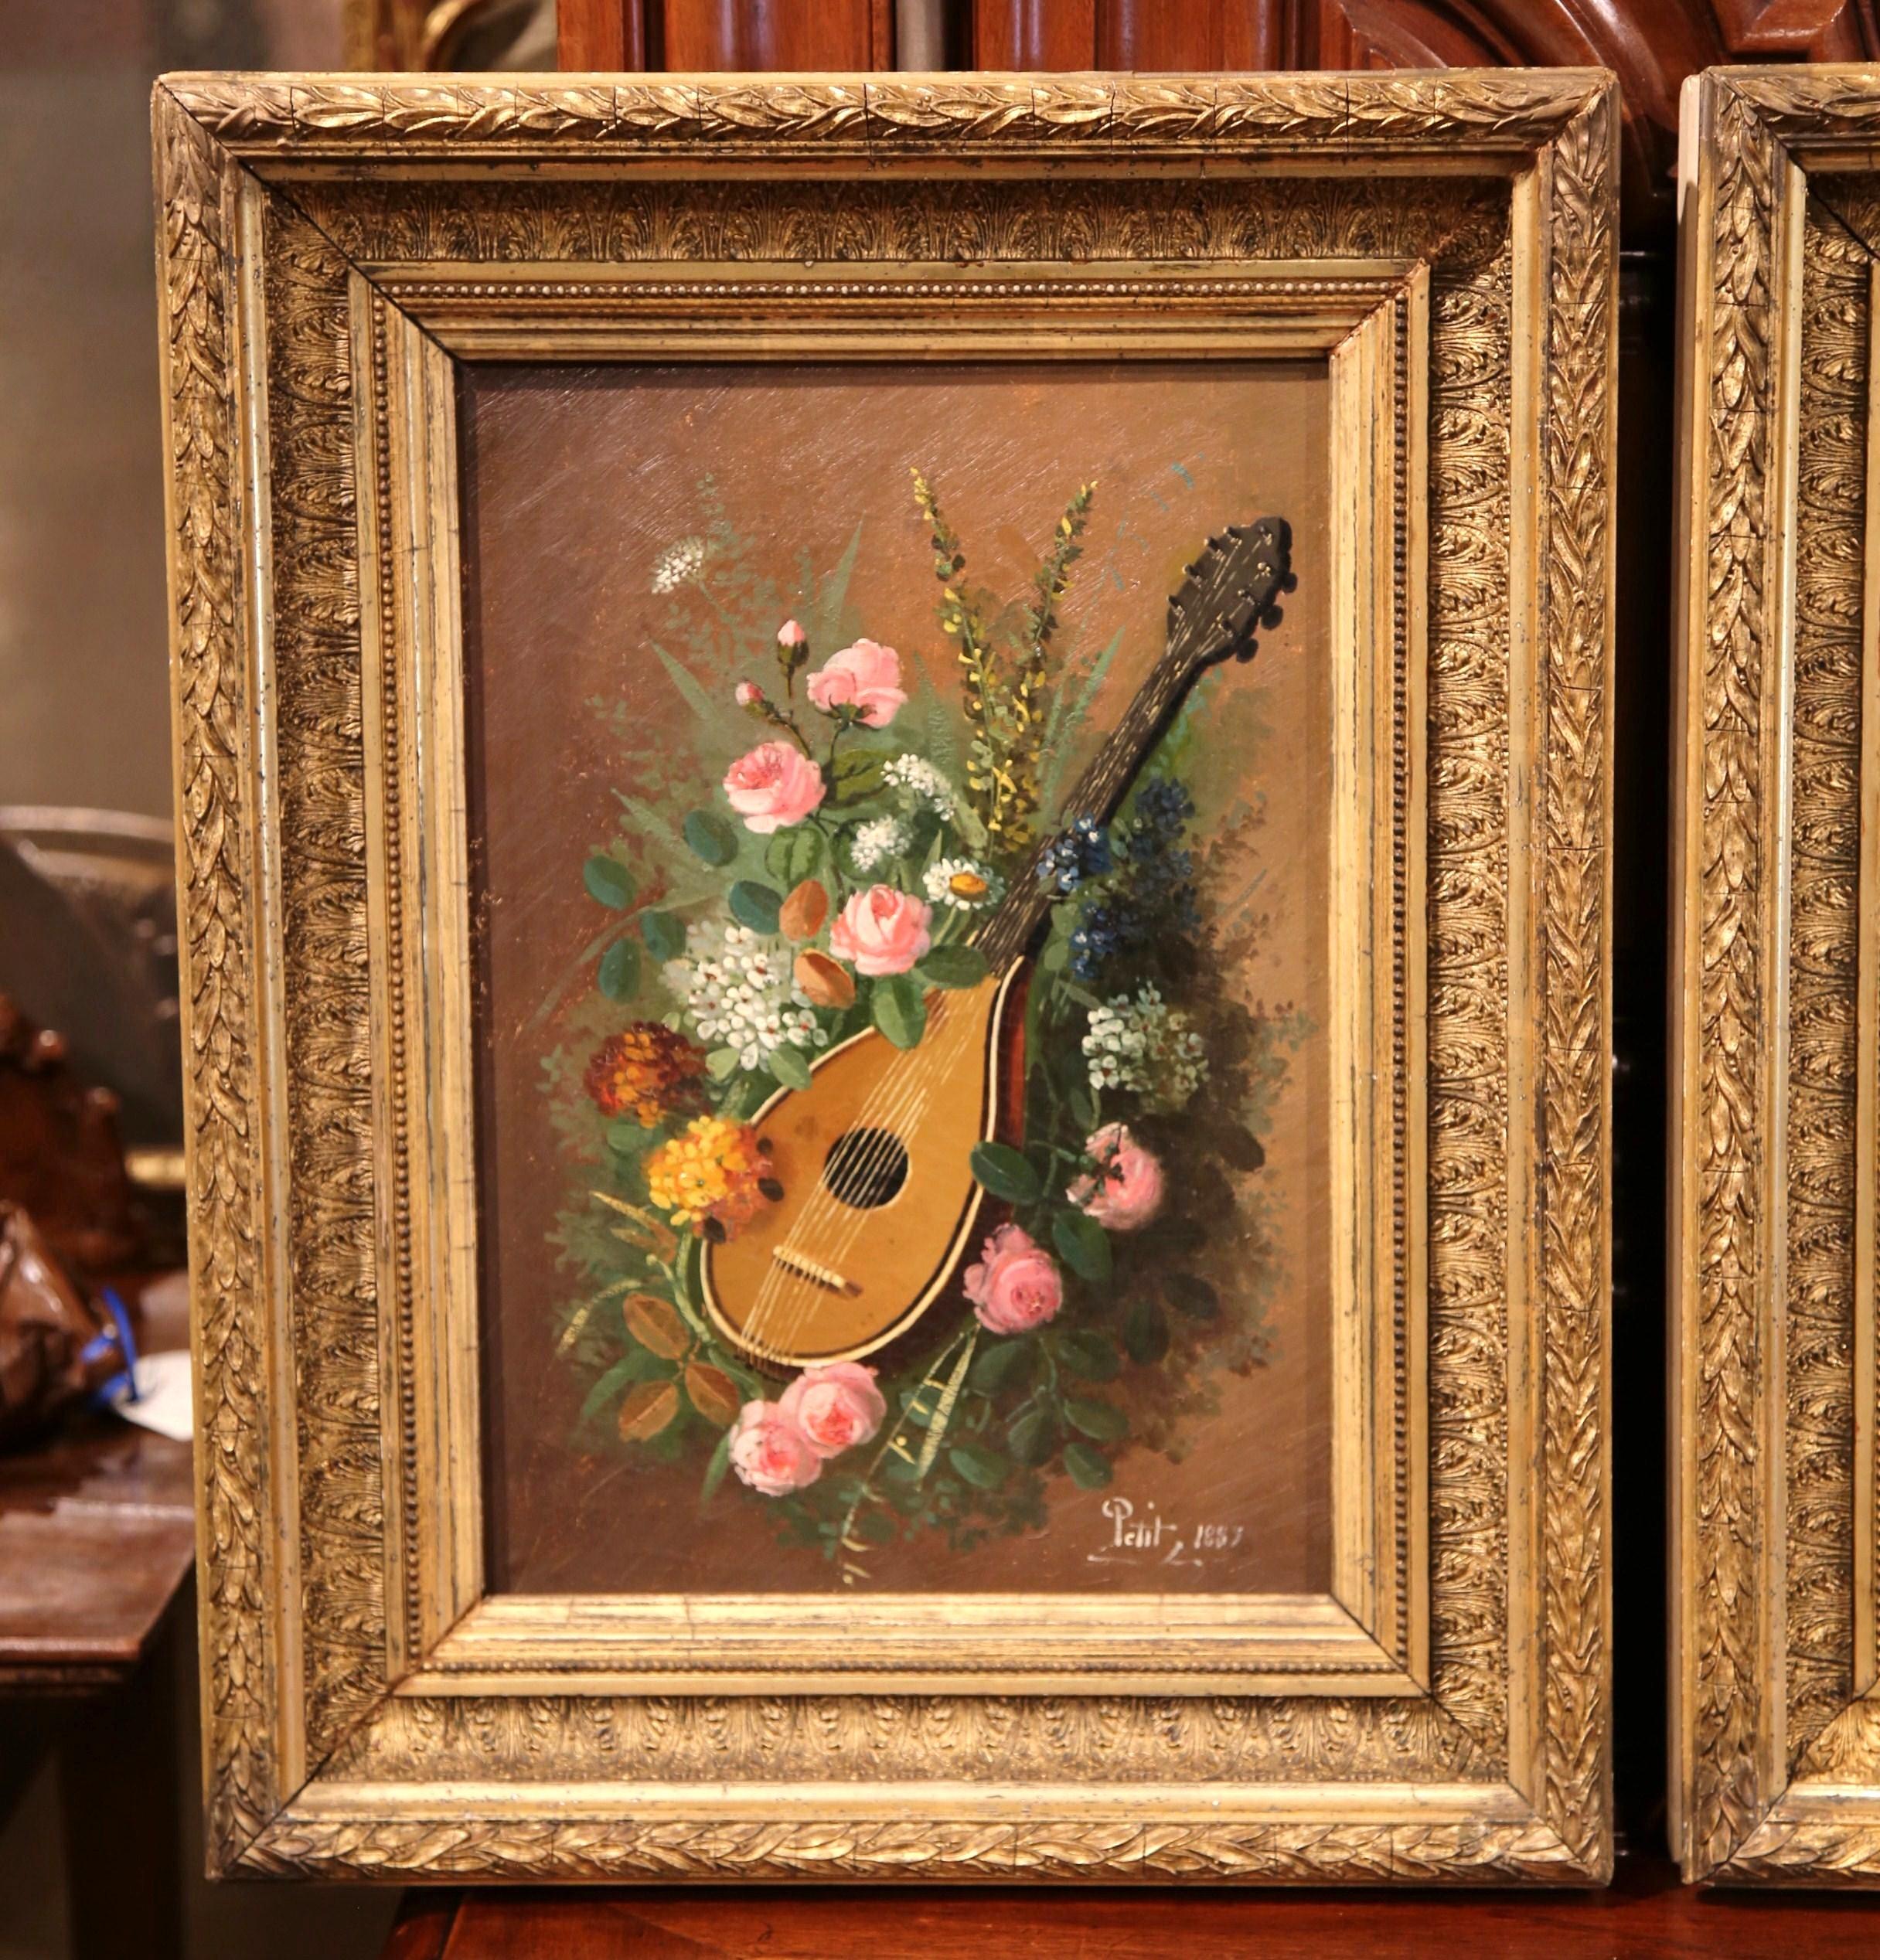 These antique oil on canvas paintings were created in France, circa 1889; set in the original carved gilt frame, each canvas depicts a still life composition; one with flower bouquet and a mandolin, and paint brushes, floral composition and palette